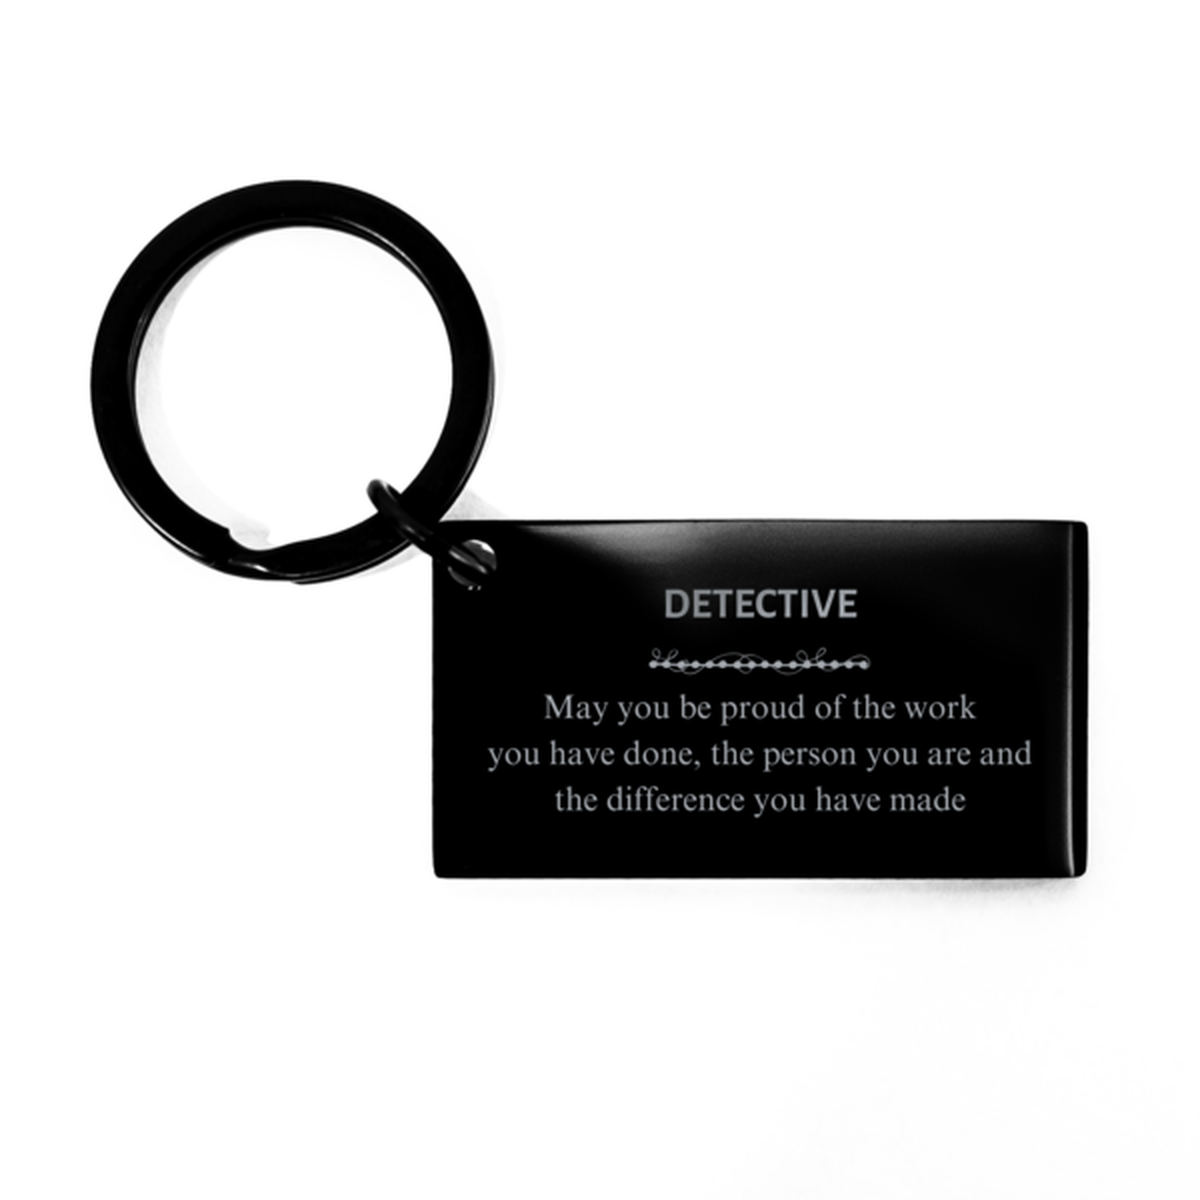 Groundskeeper May you be proud of the work you have done, Retirement Detective Keychain for Colleague Appreciation Gifts Amazing for Detective